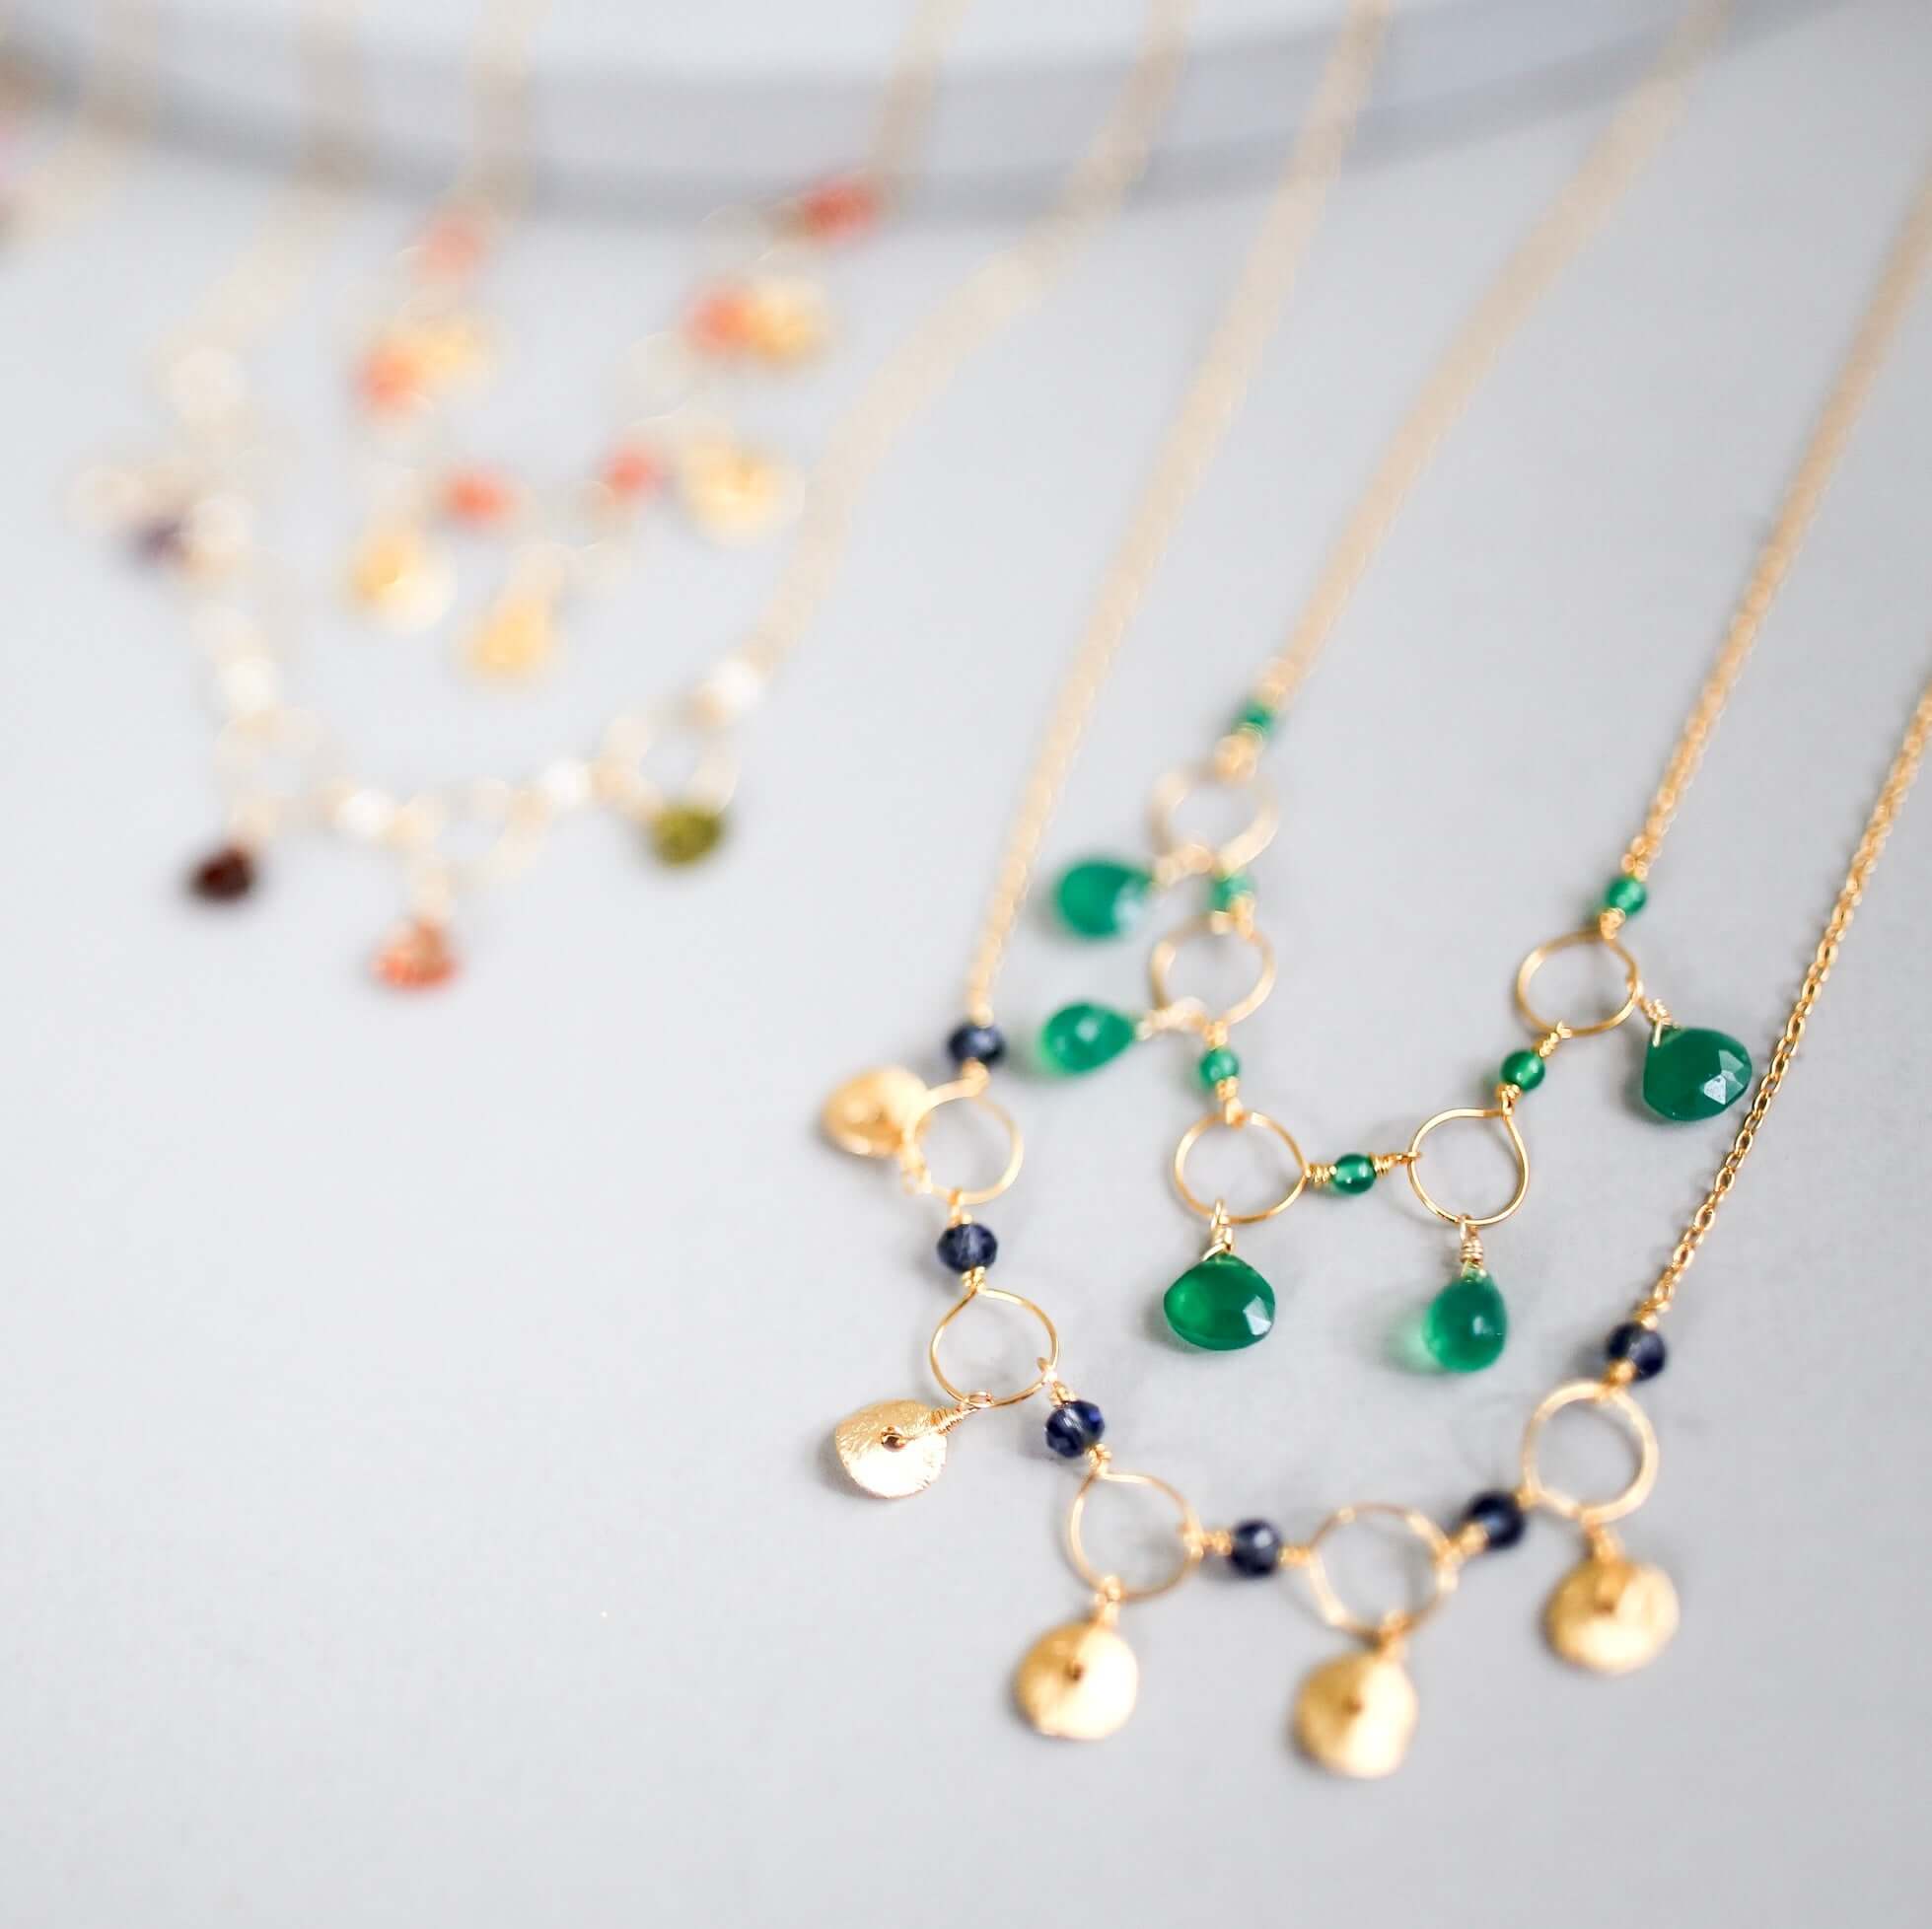 Colorful Adjustable Gemstone Chain Necklace